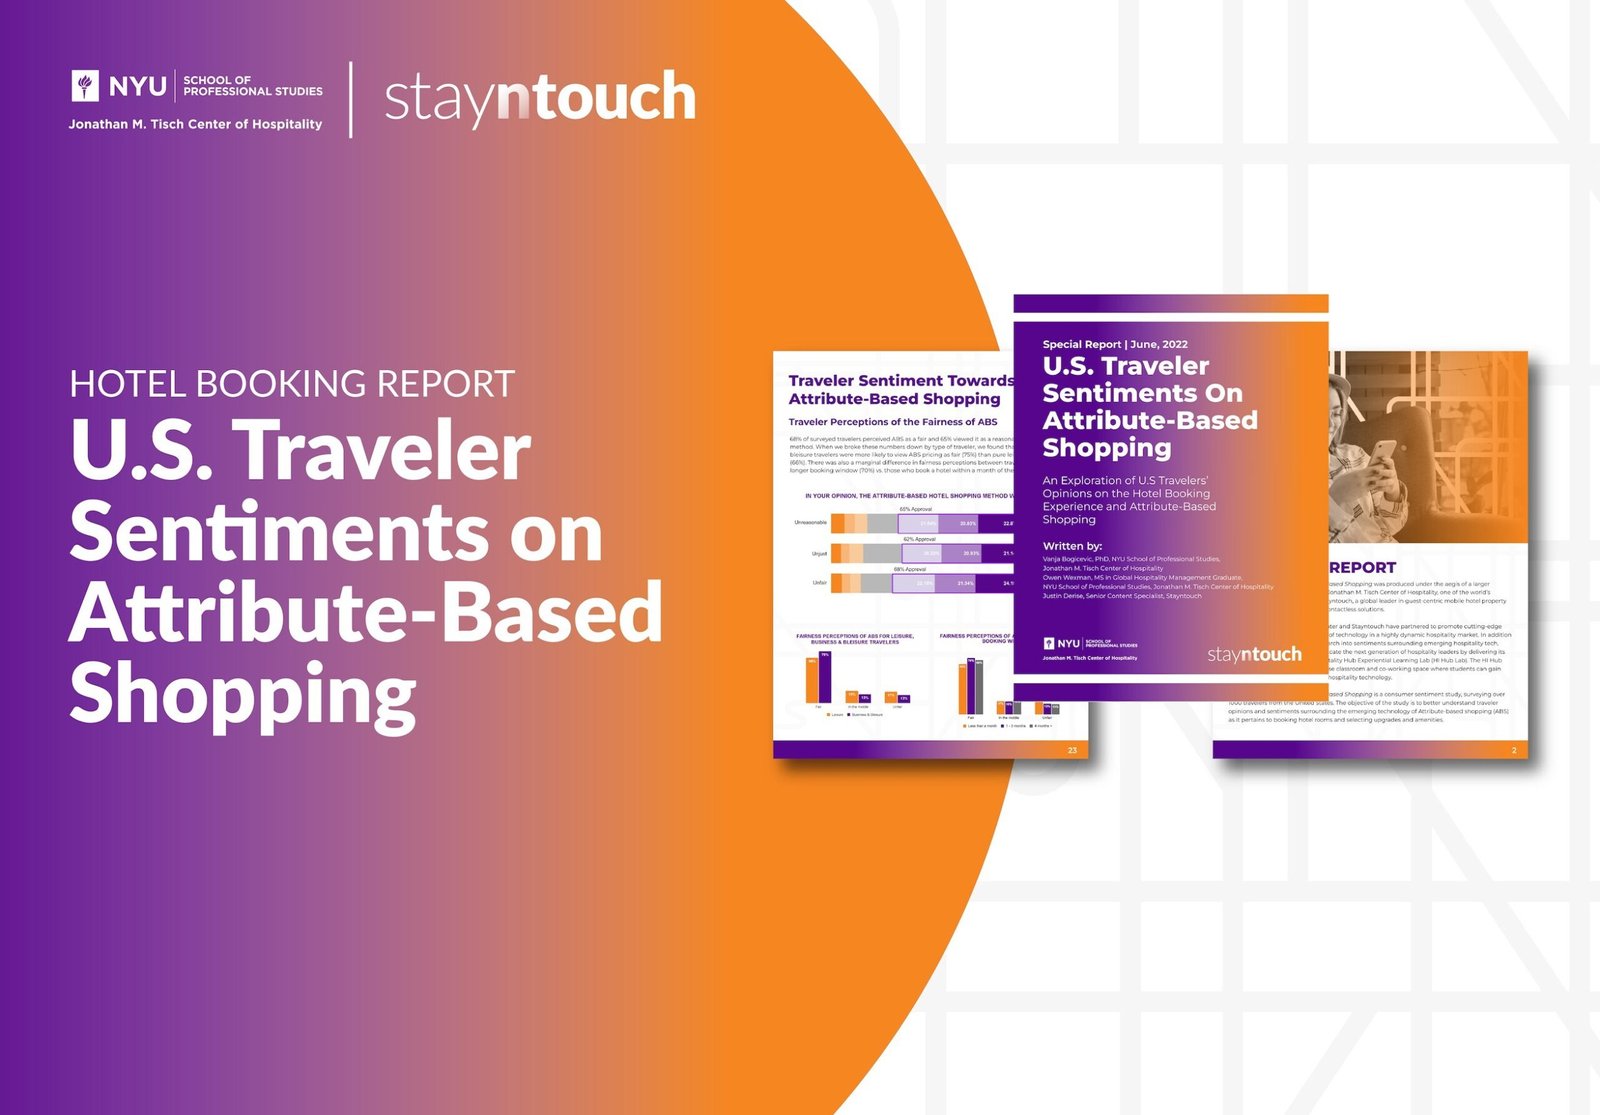 Stayntouch and the NYU School of Professional Studies Jonathan M. Tisch Center of Hospitality US Traveler Sentiment Report Indicates: Hotels’ Transition from “Traditional Hotel Shopping” to “Attribute-Based Shopping” Likely to Increase Traveler Value, Transparency, and Personalization